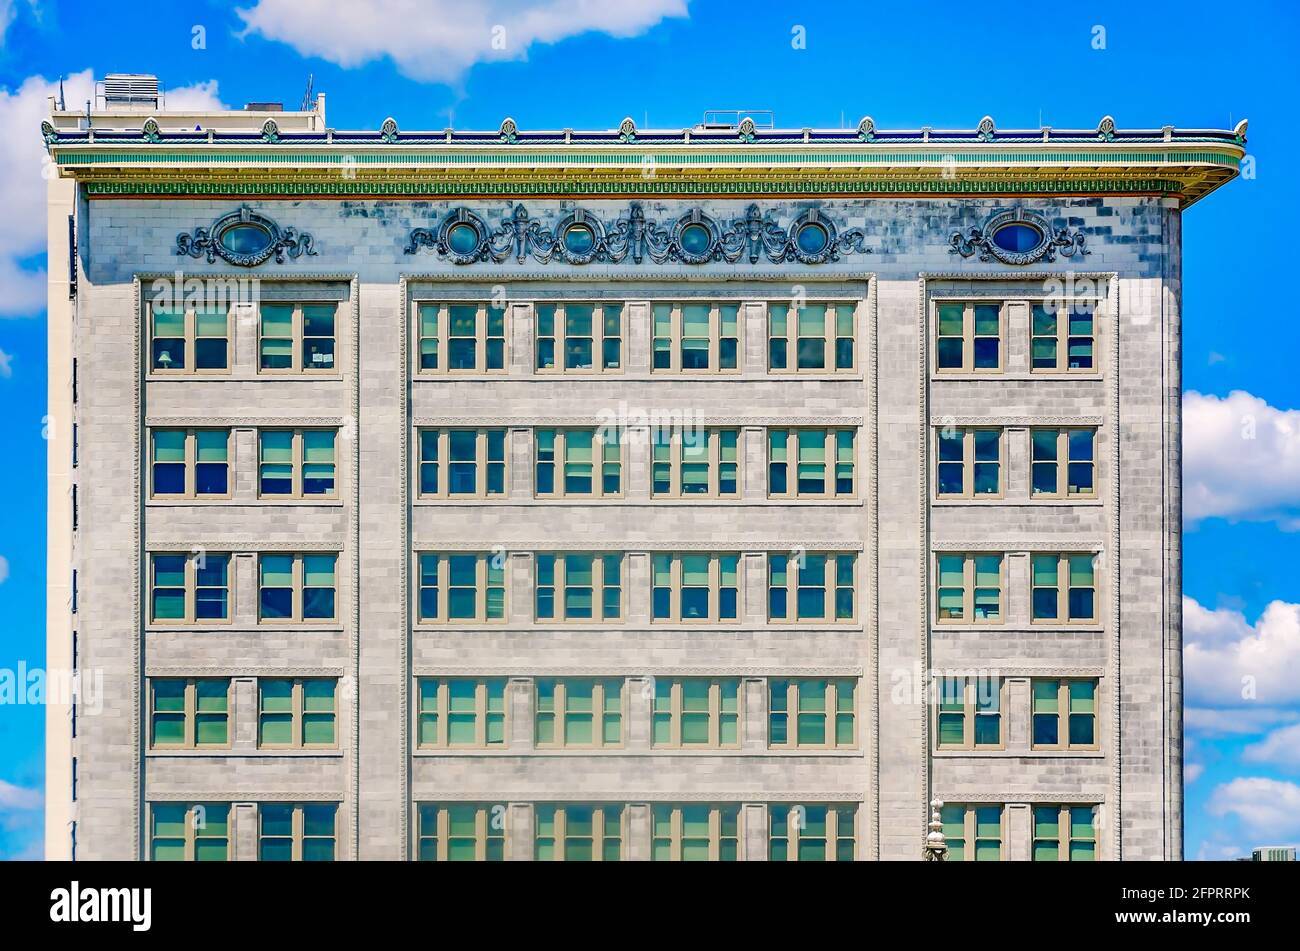 The Van Antwerp building is pictured, May 14, 2021, in Mobile, Alabama. The building was constructed in 1907. Stock Photo